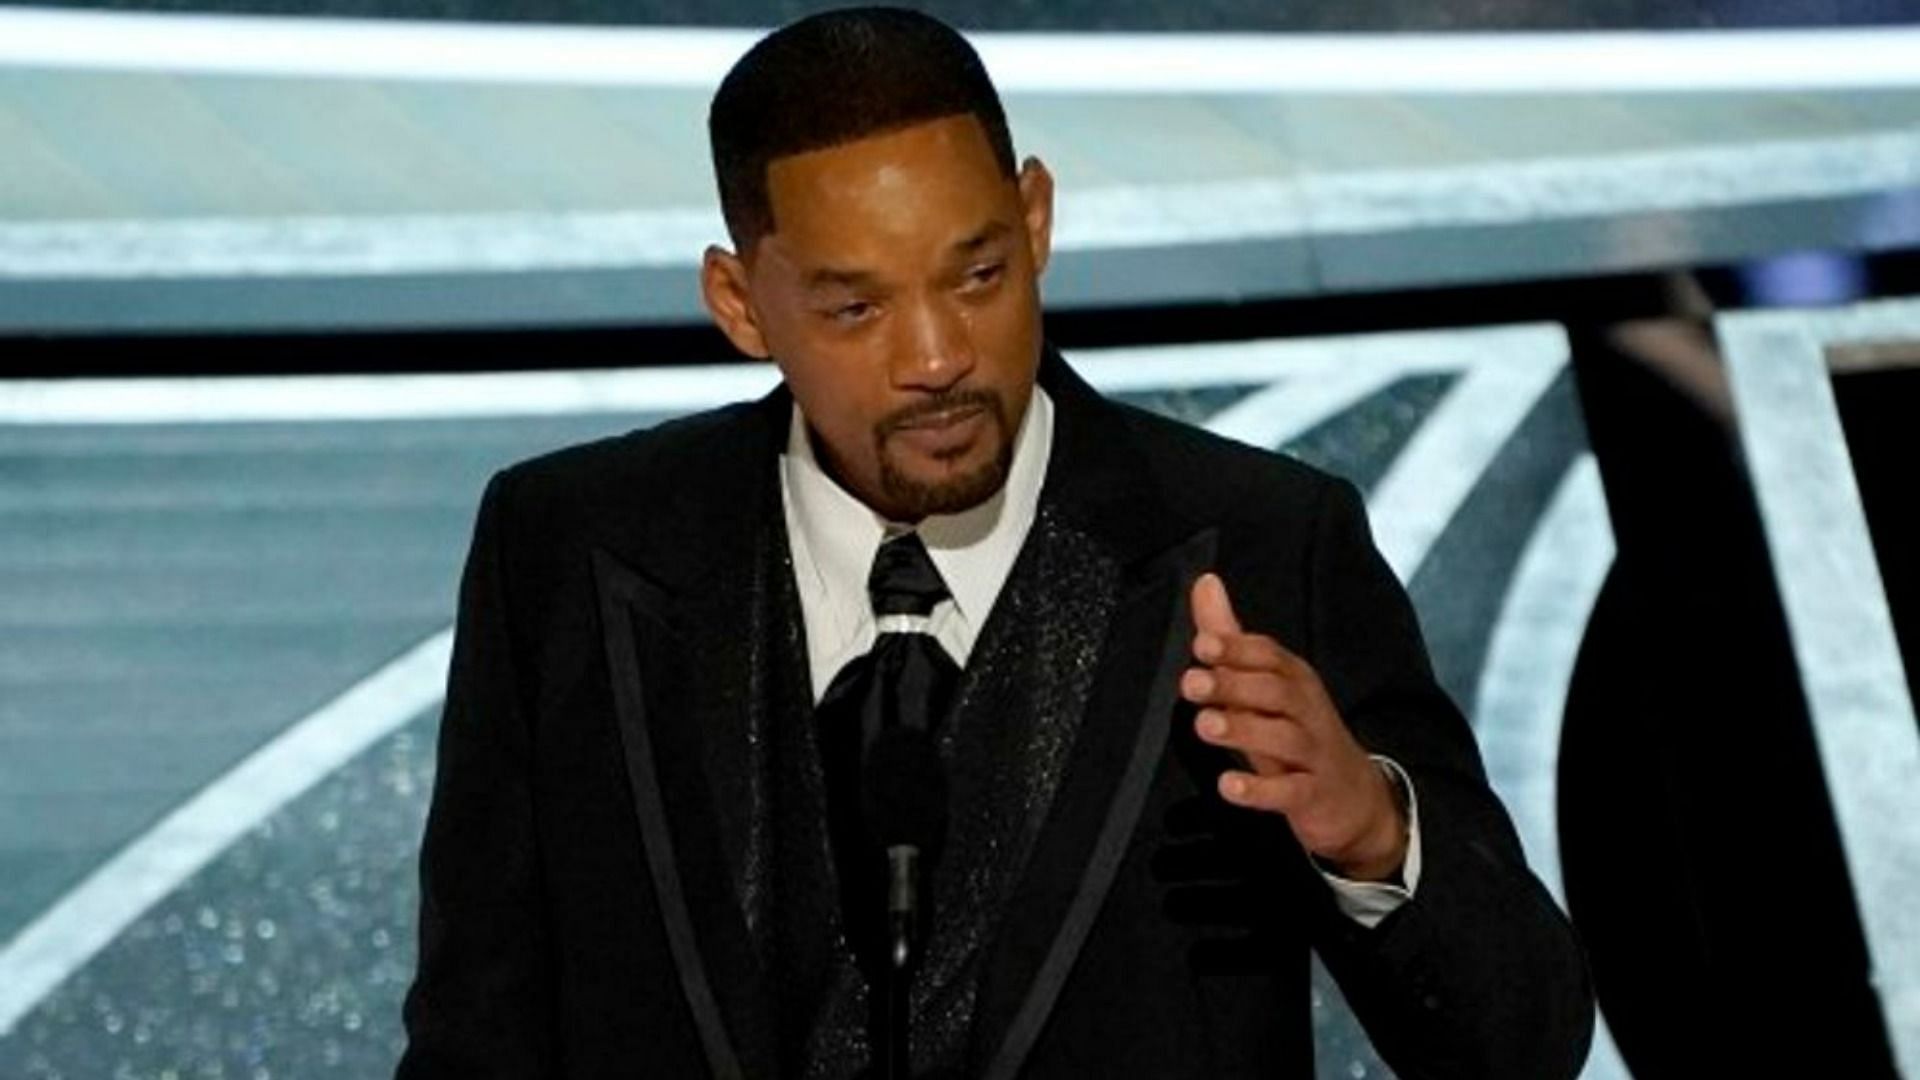 Will Smith issues public apology after infamous Oscar slap (Image via AP)